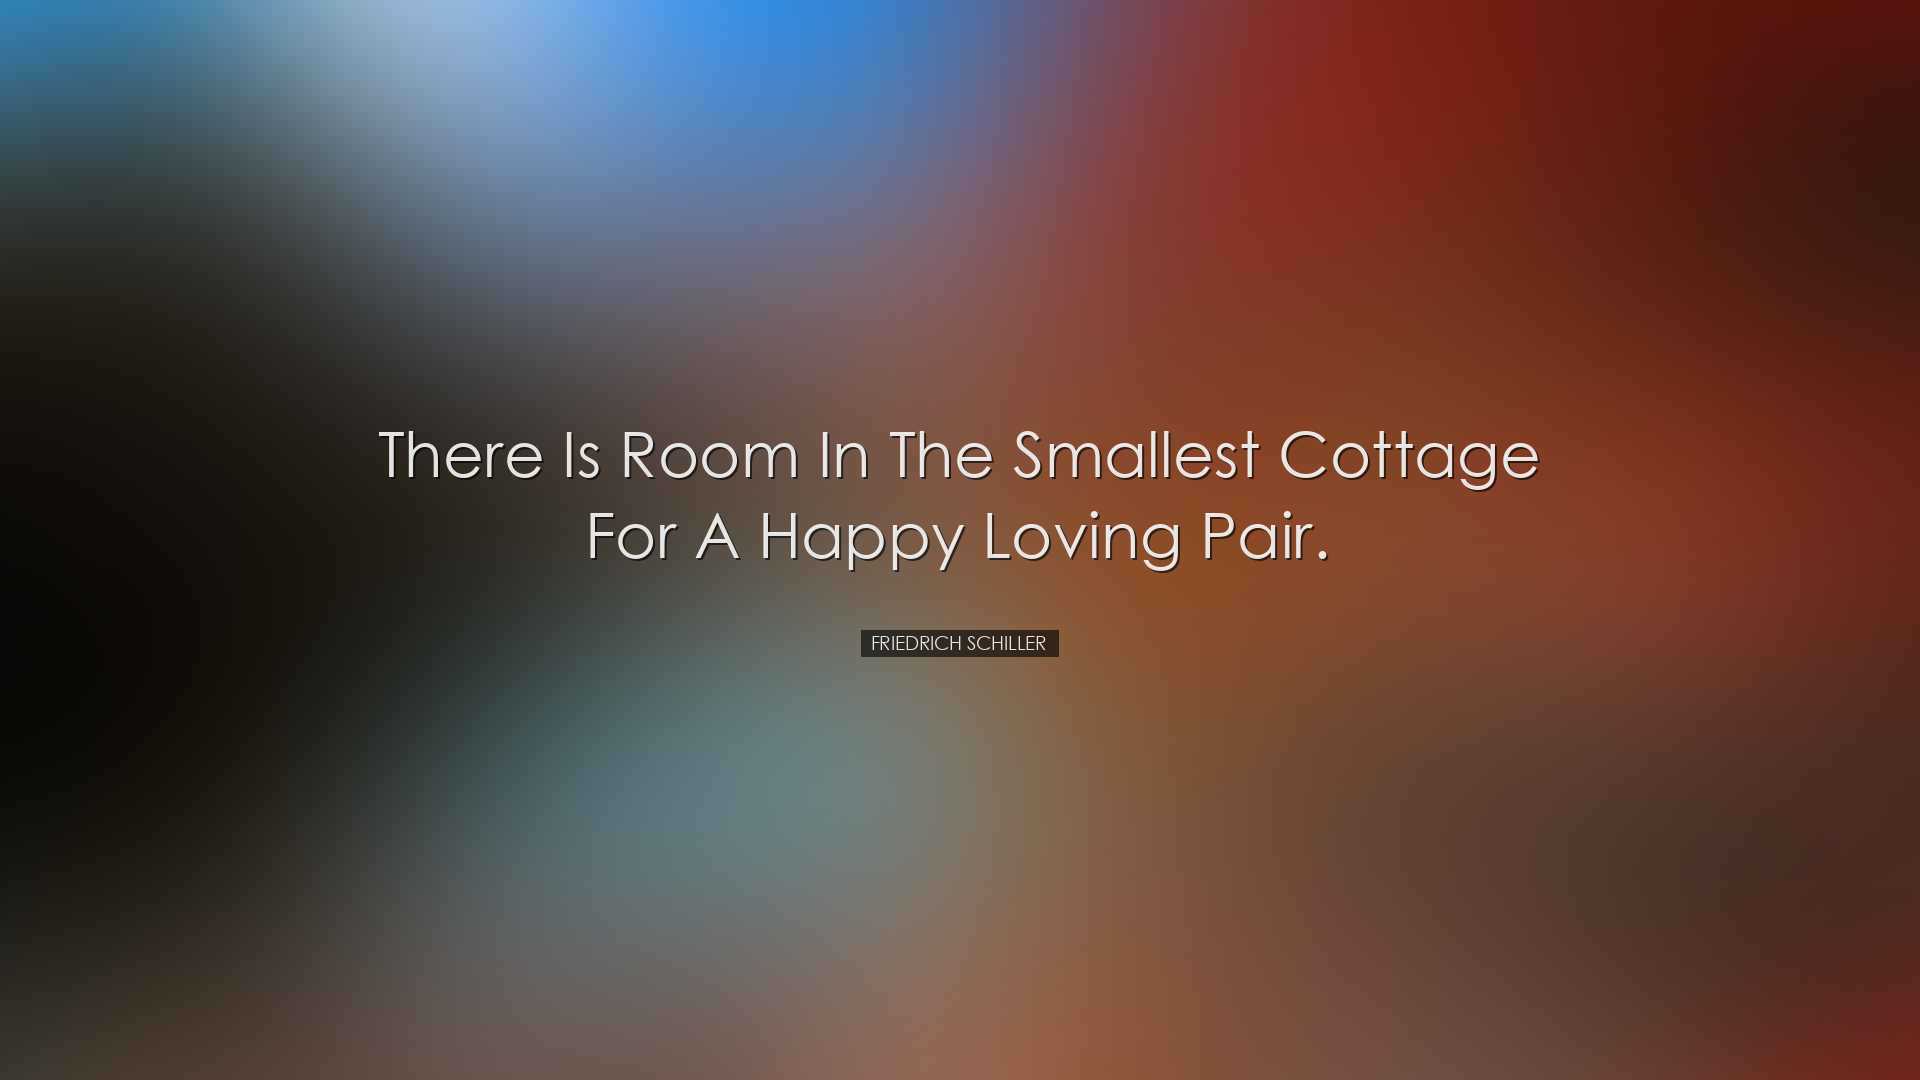 There is room in the smallest cottage for a happy loving pair. - F